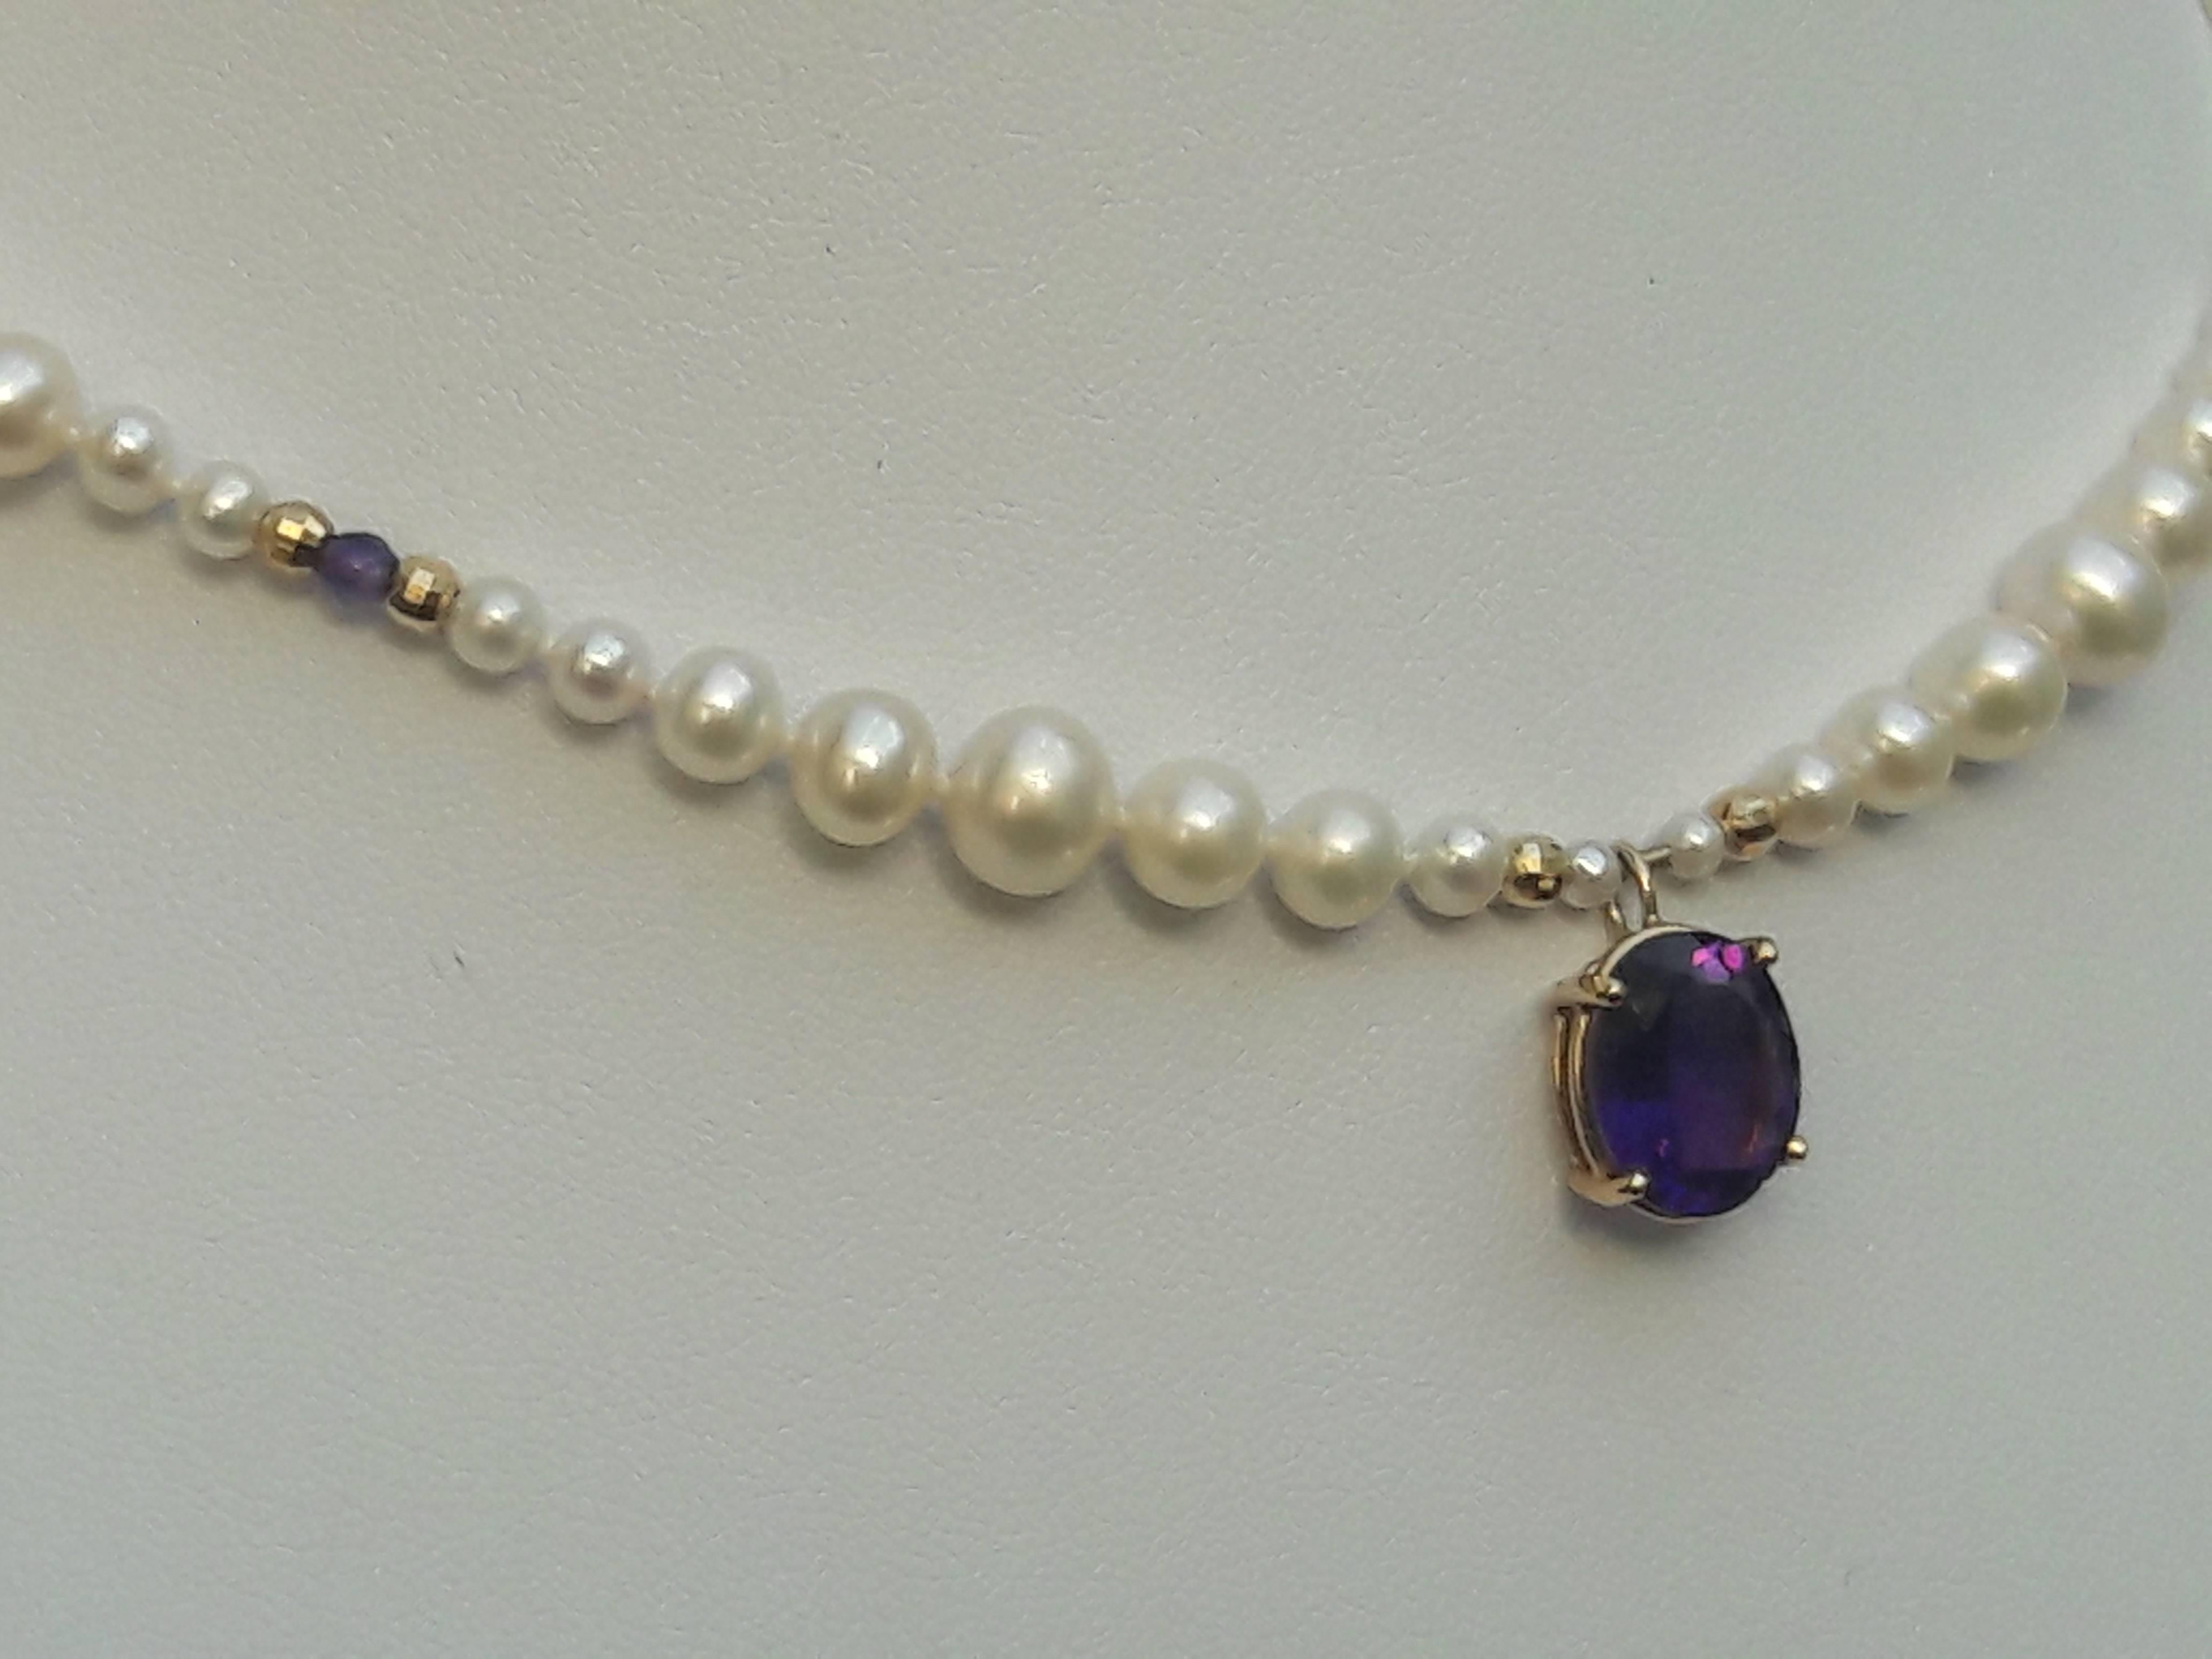 This unique and vibrant necklace is designed around clusters of graduated pearls that are divided by a small faceted amethyst bead and a pair of 14 K yellow gold faceted beads. Round and smooth pearls are 2 mm - 6 mm.

The center pendant is a